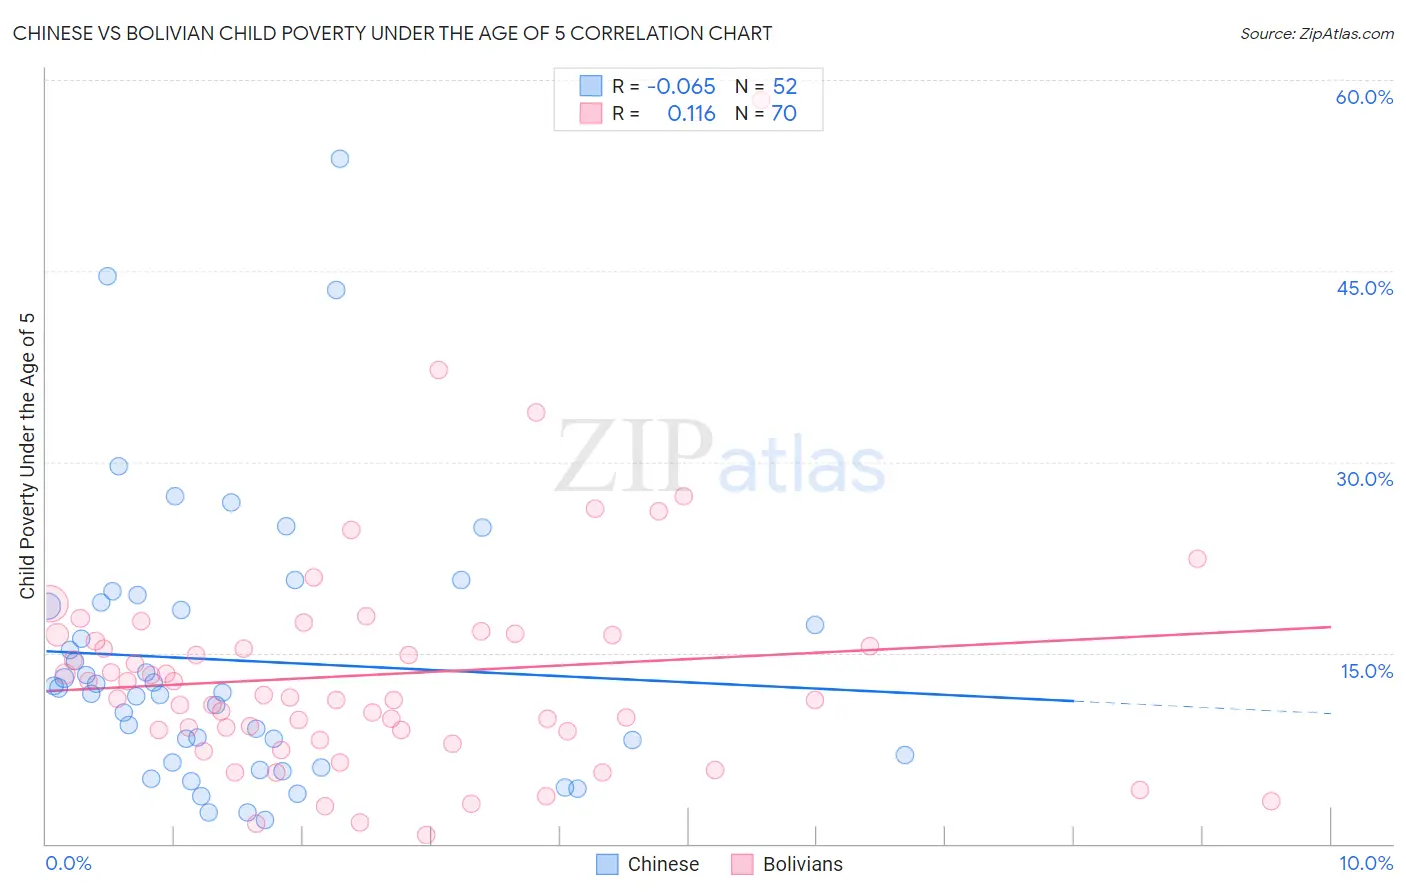 Chinese vs Bolivian Child Poverty Under the Age of 5